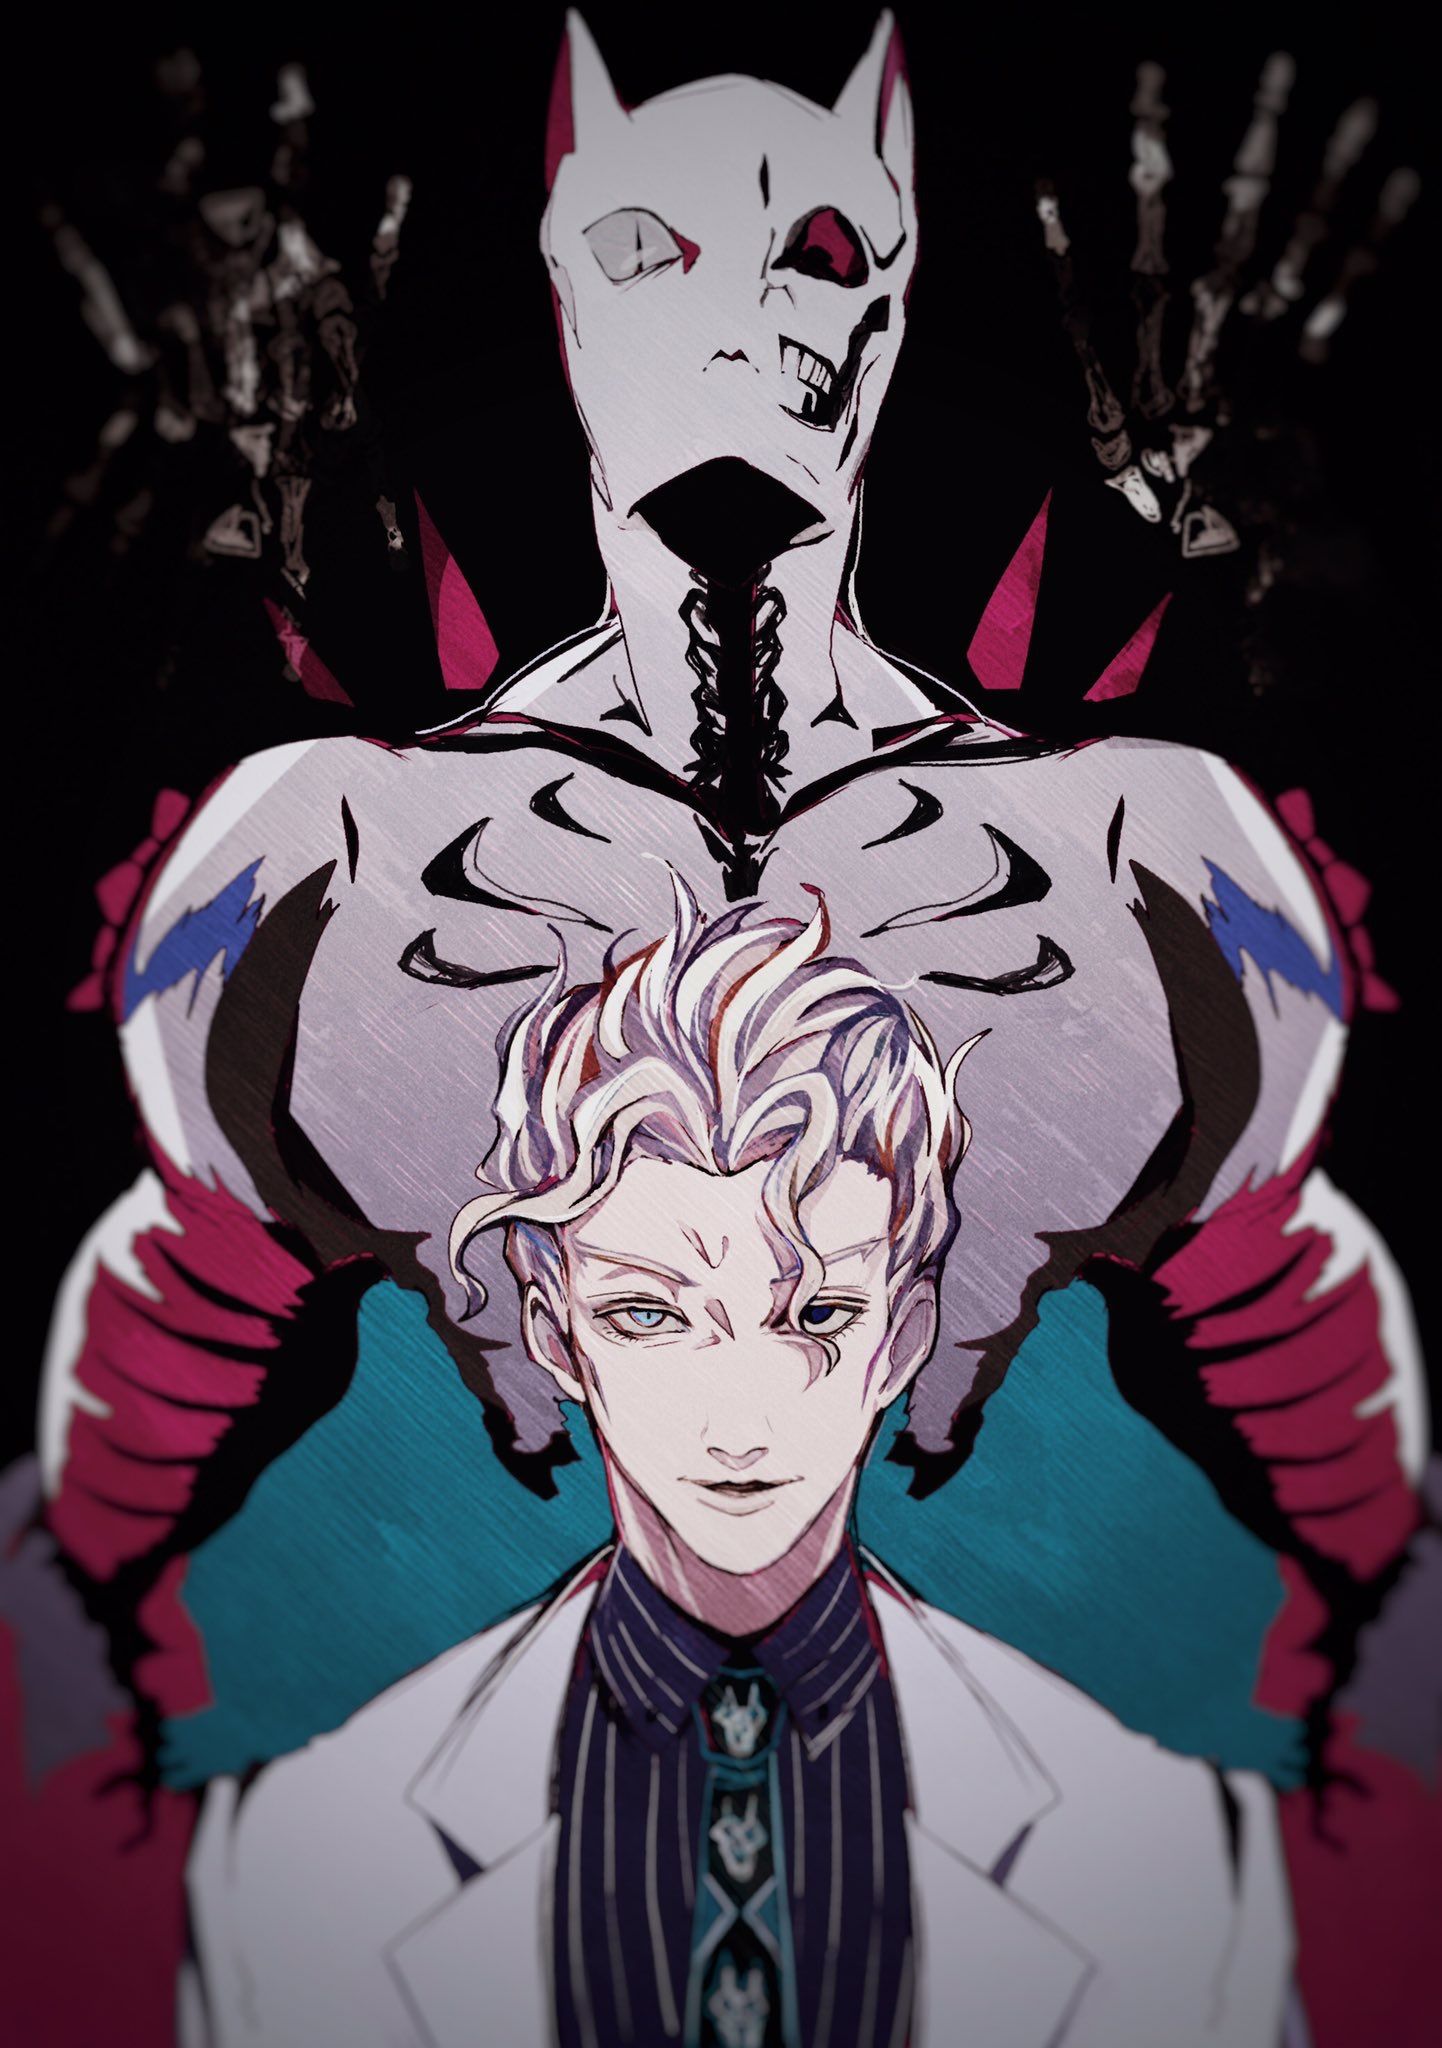 Does anyone have a wallpaper of Killer Queen?